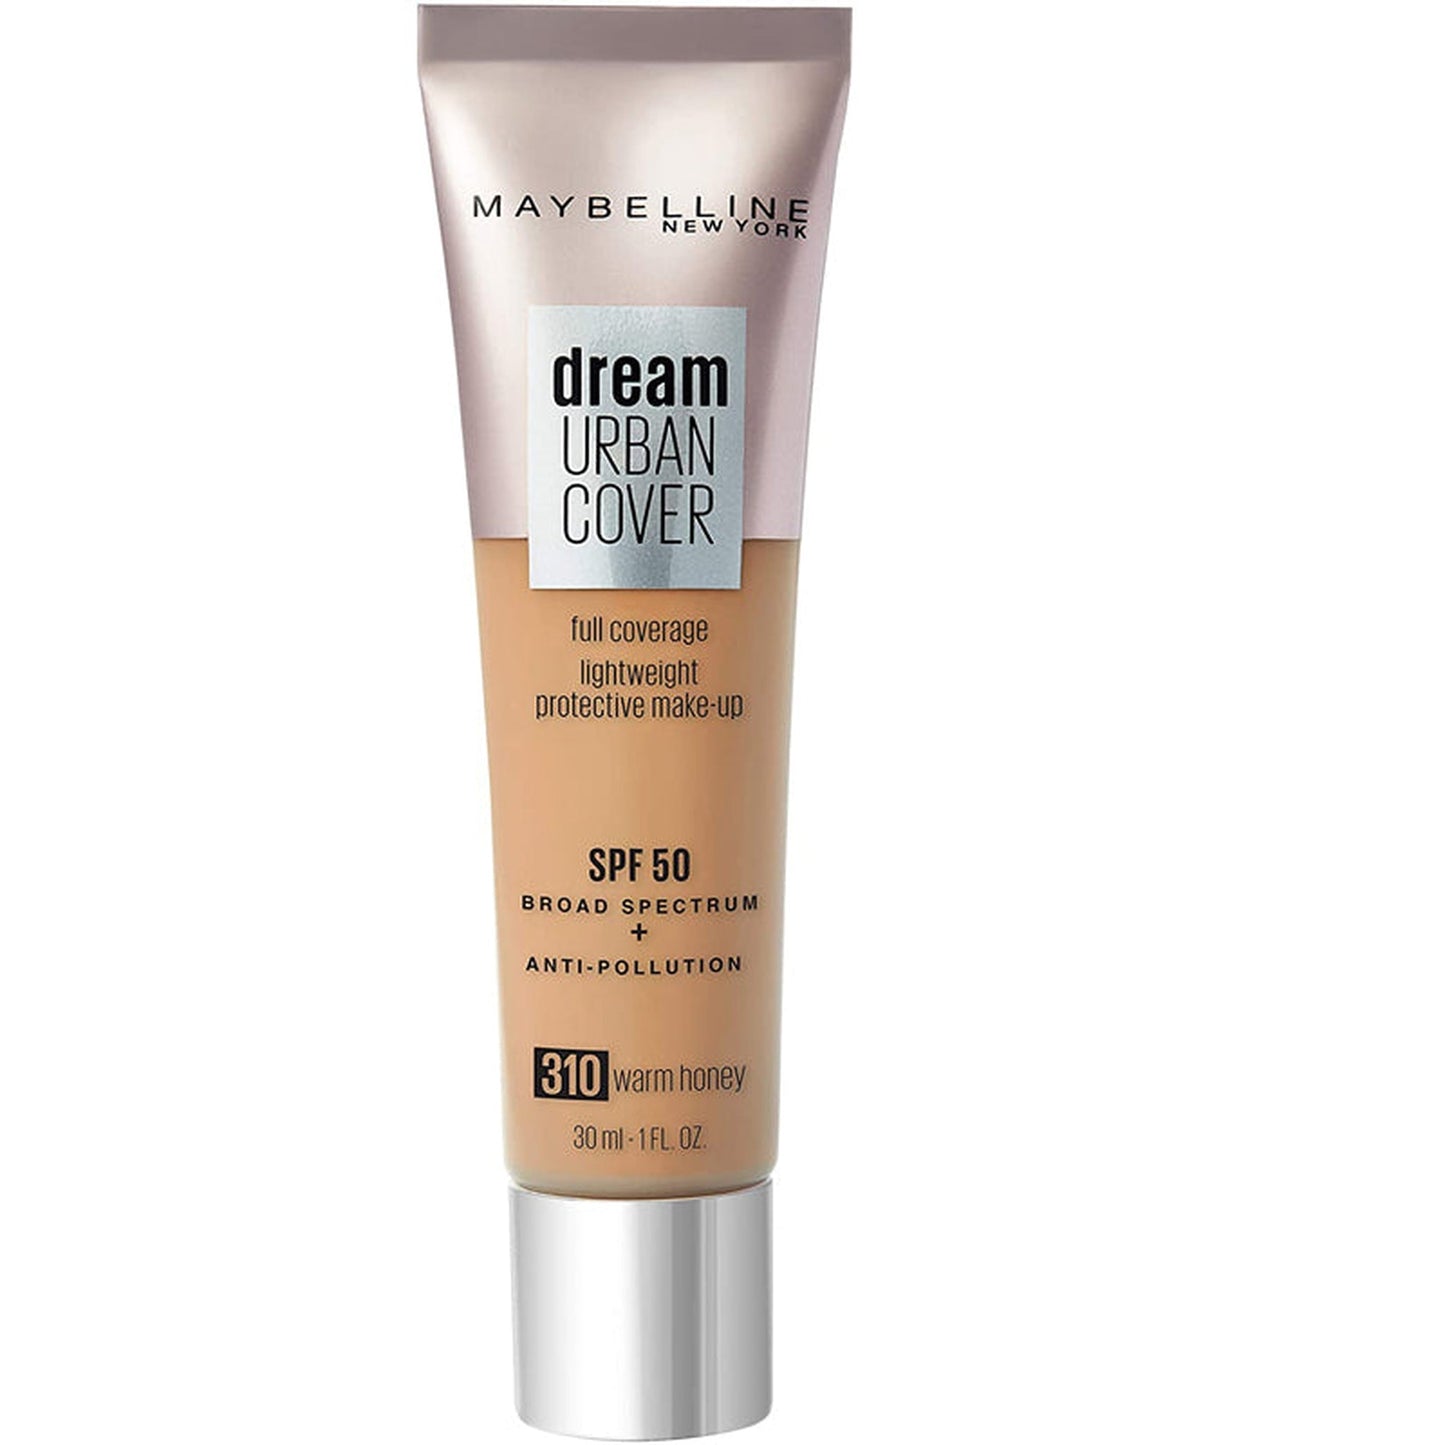 Maybeline Dream Urban Cover Foundation SPF50 - 310 Warm Honey-Maybelline-BeautyNmakeup.co.uk